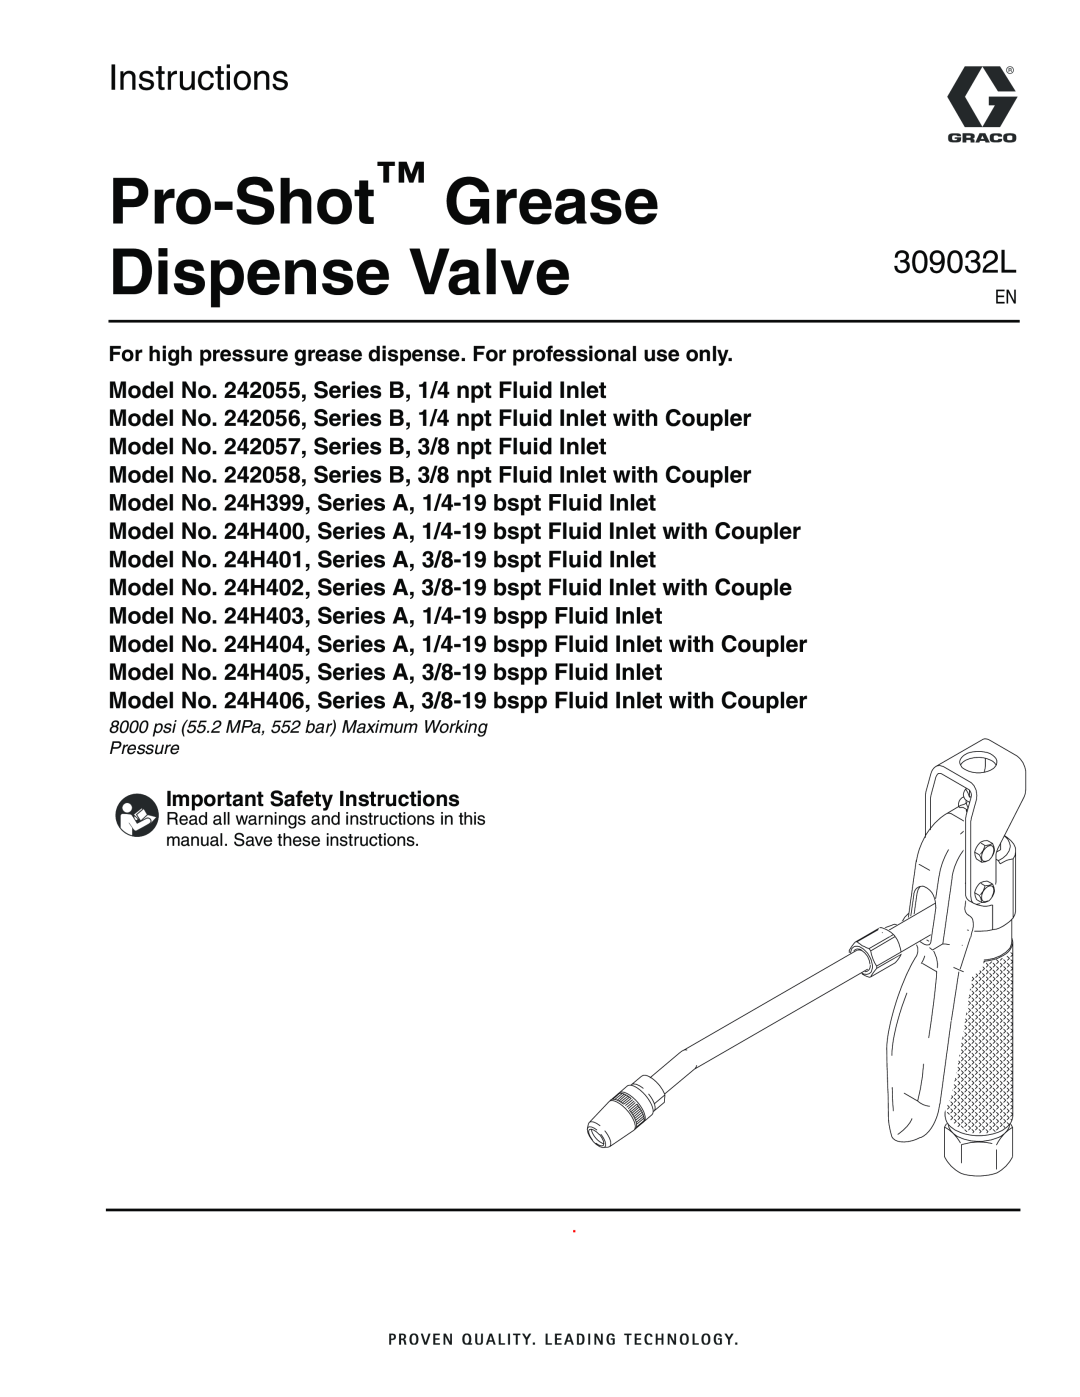 Graco 24H399, 24H406, 24H404, 24H402 important safety instructions Pro-Shot Grease Dispense Valve, Instructions, 309032L 